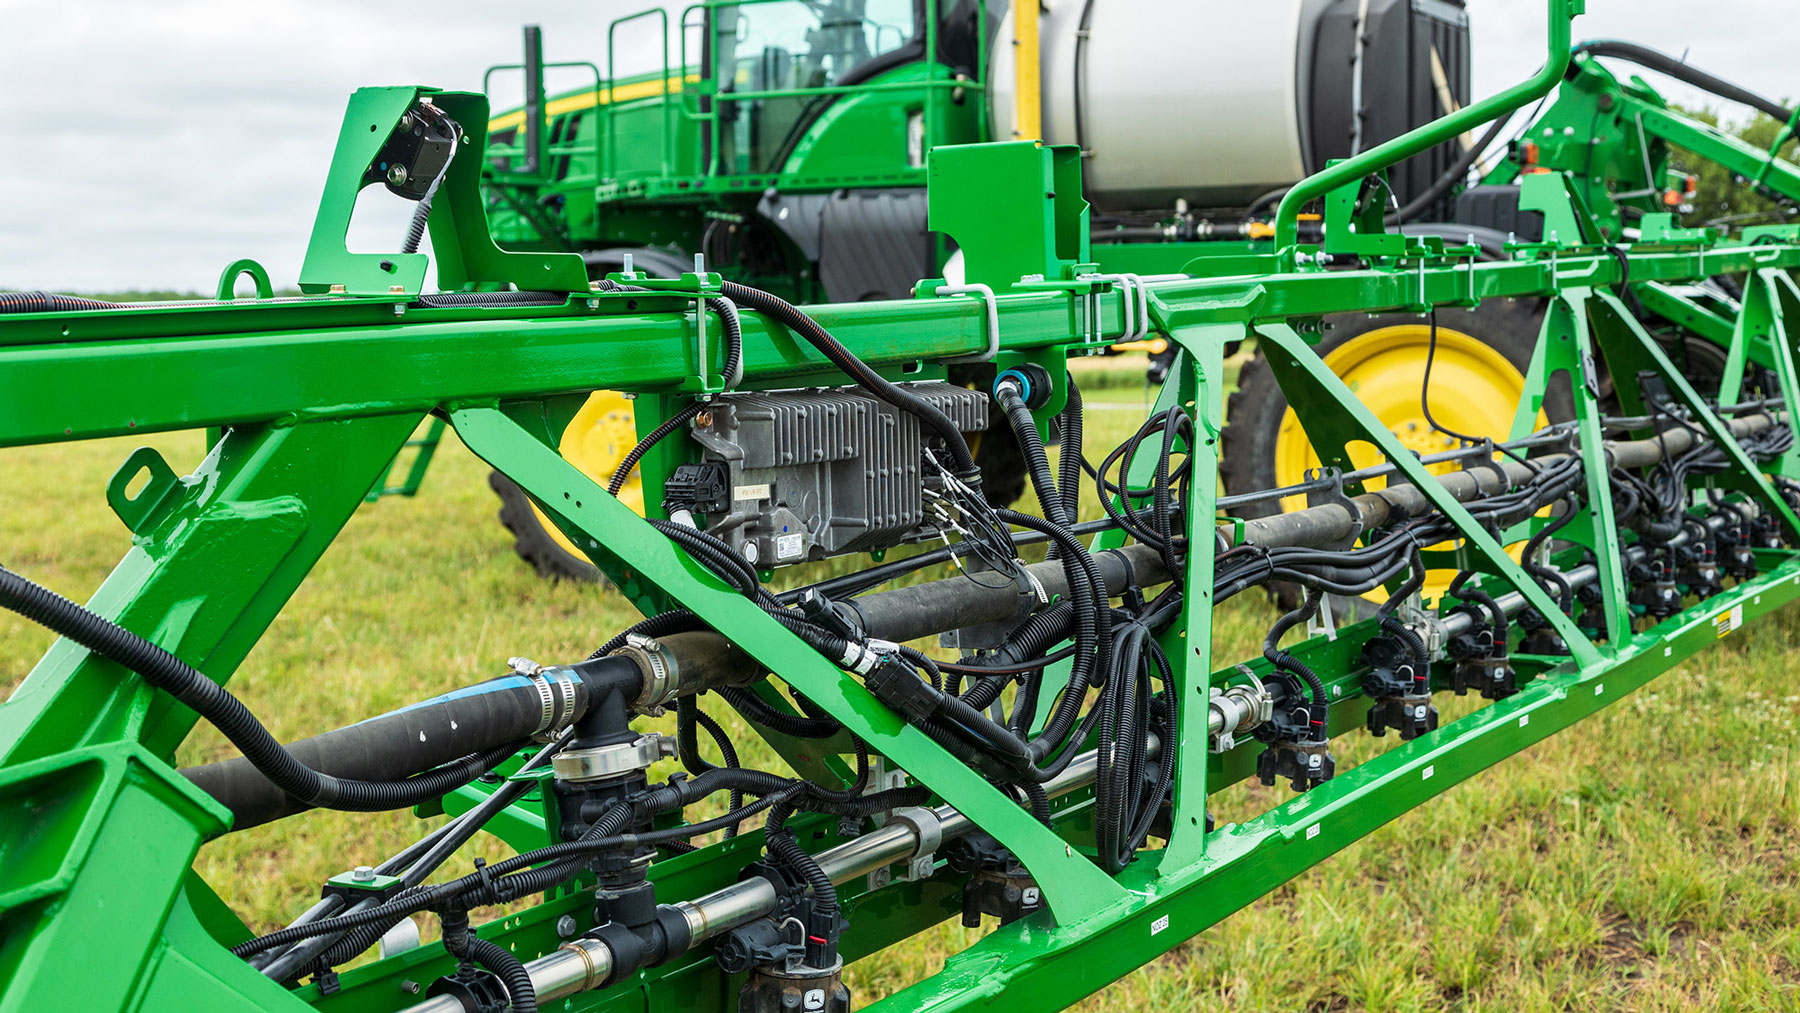 John Deere's model year 2024 tractors with future-proofing technology